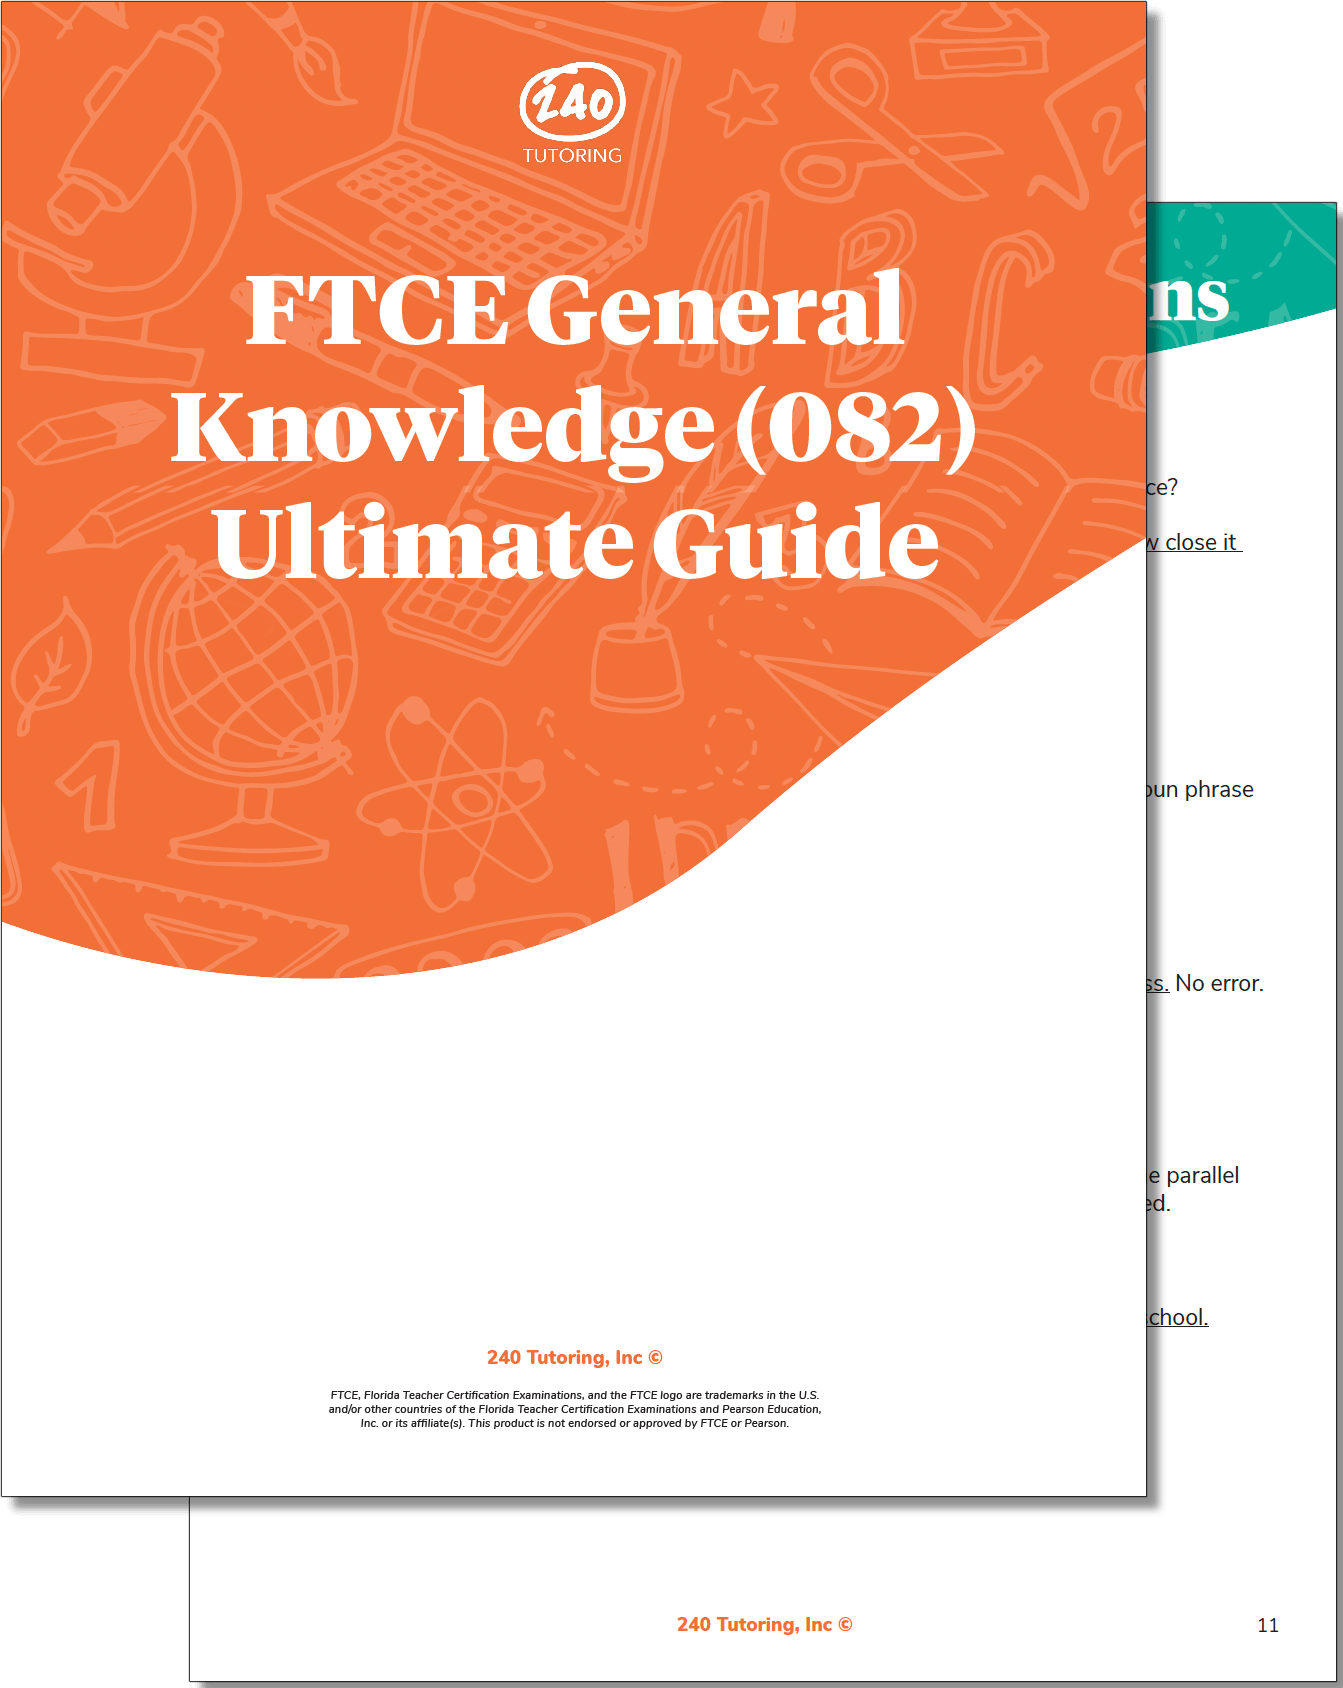 FTCE General Knowledge Test (GKT) Ultimate Guide